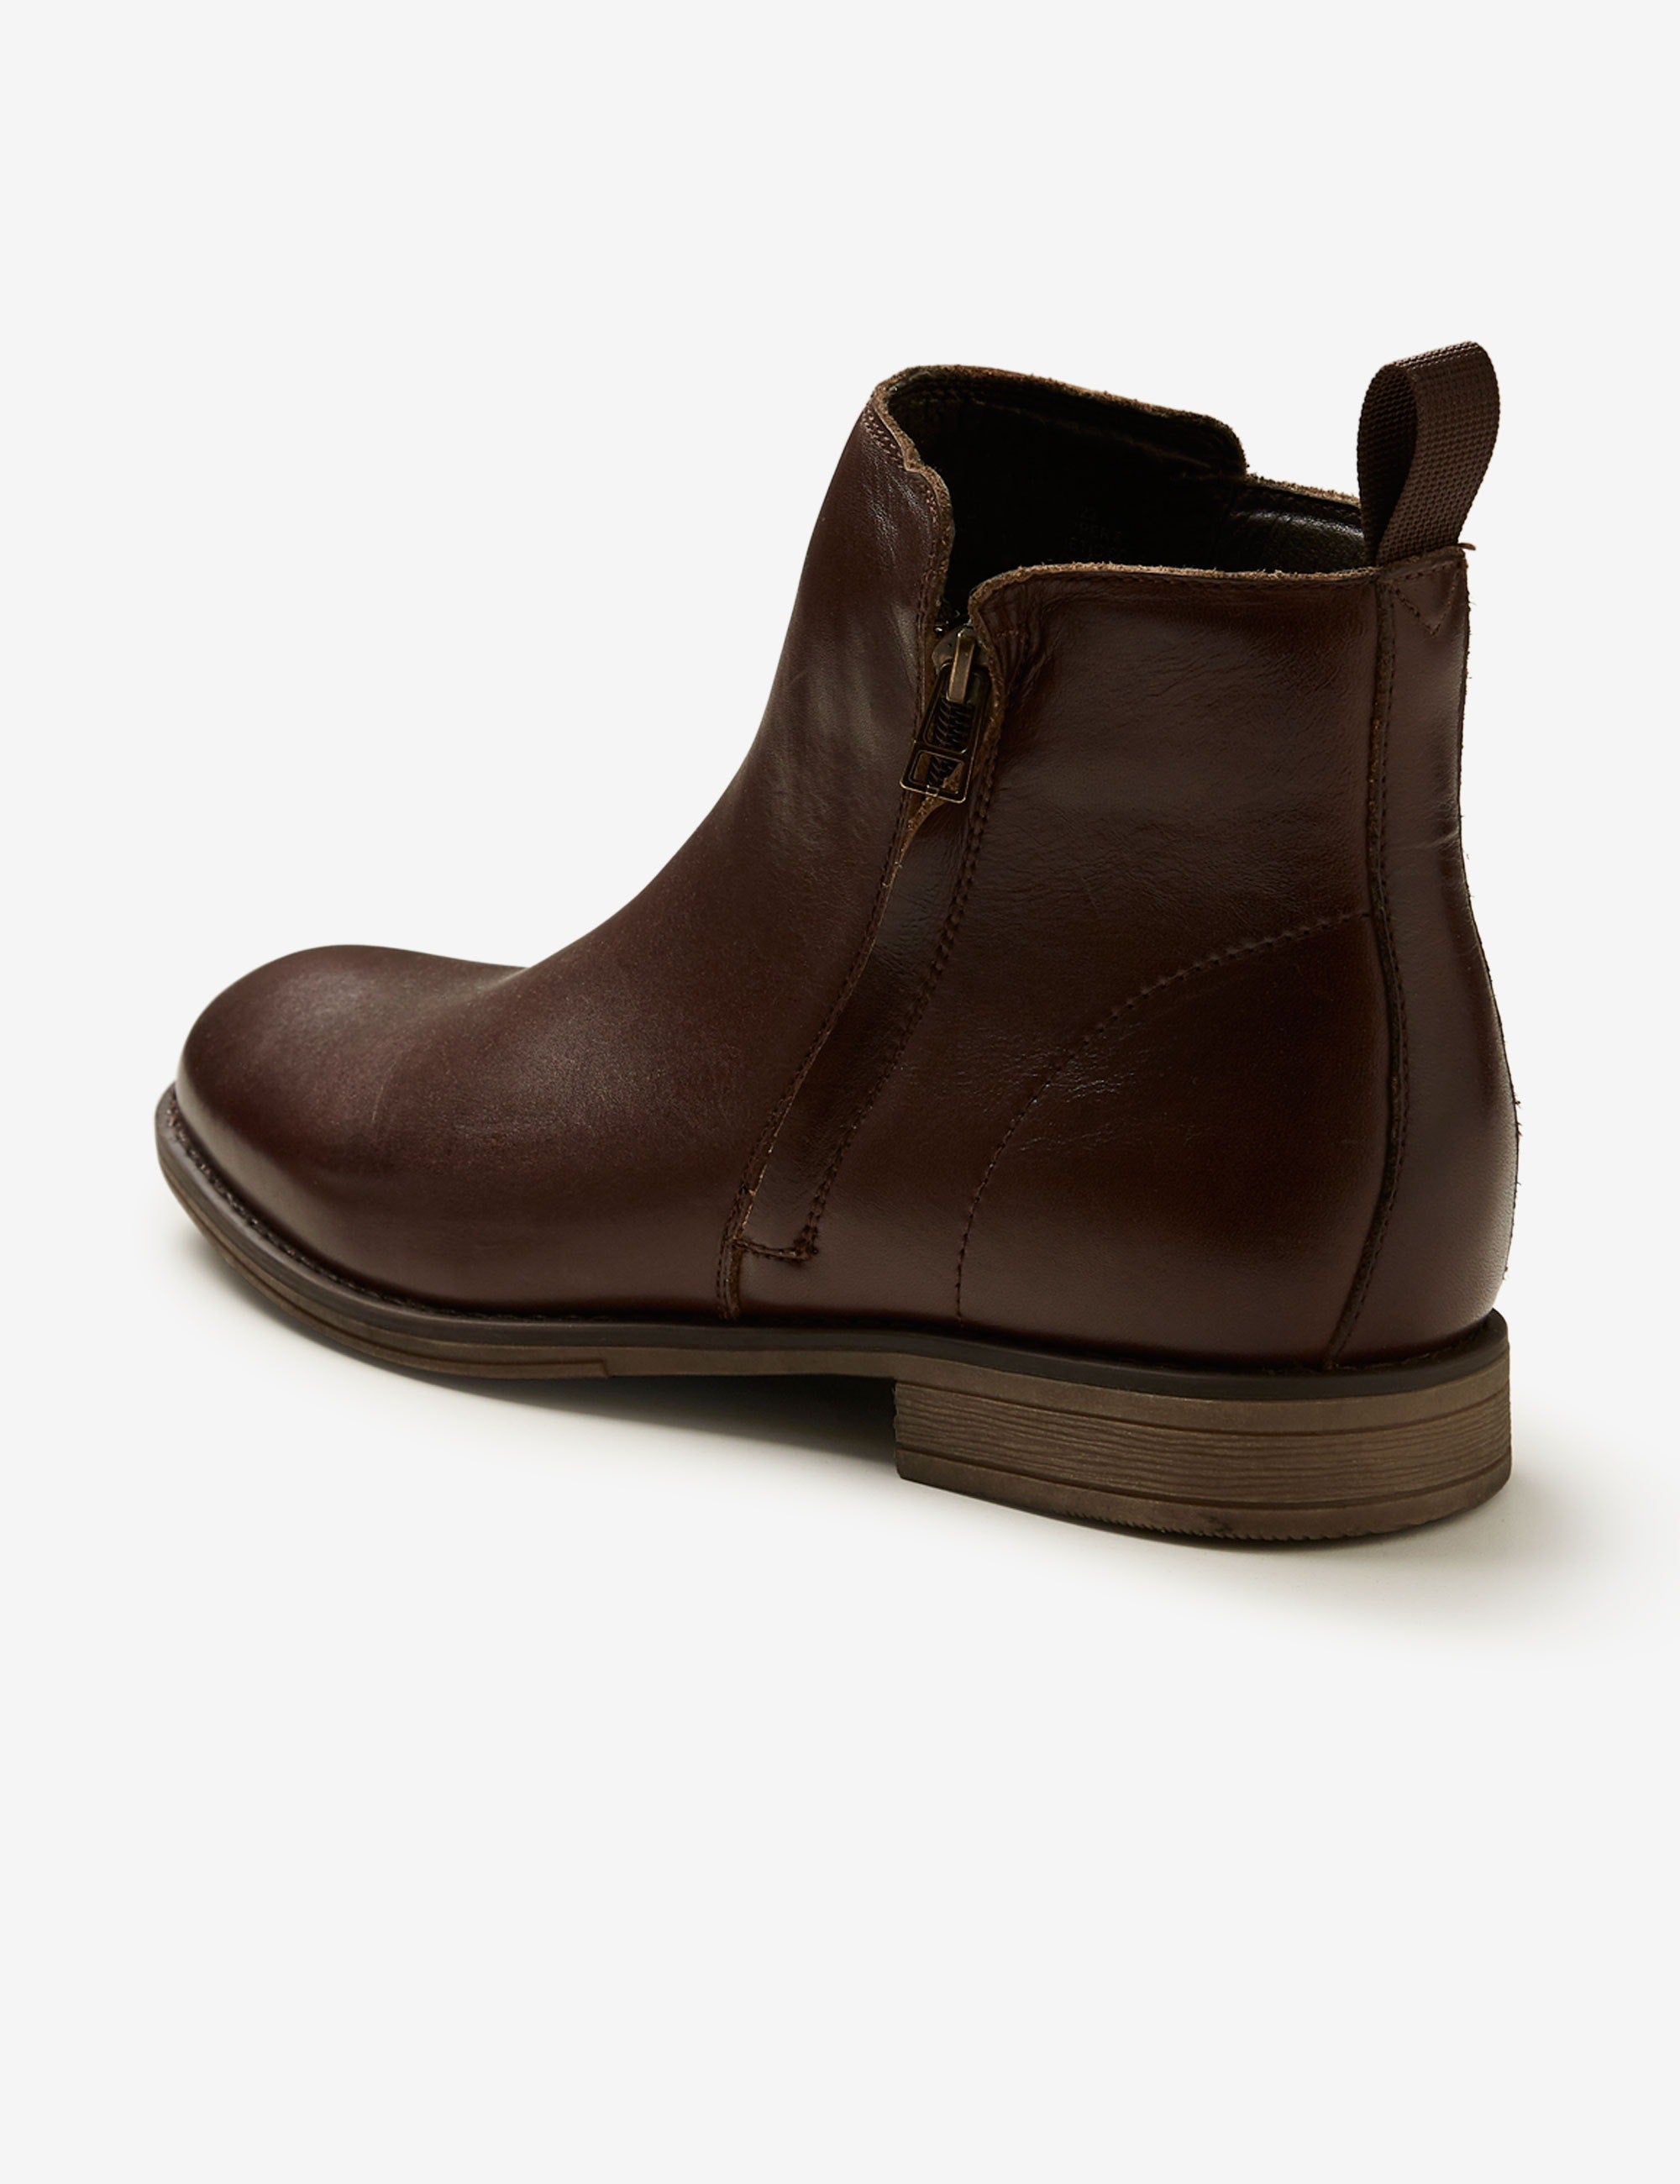 rivers chelsea boot